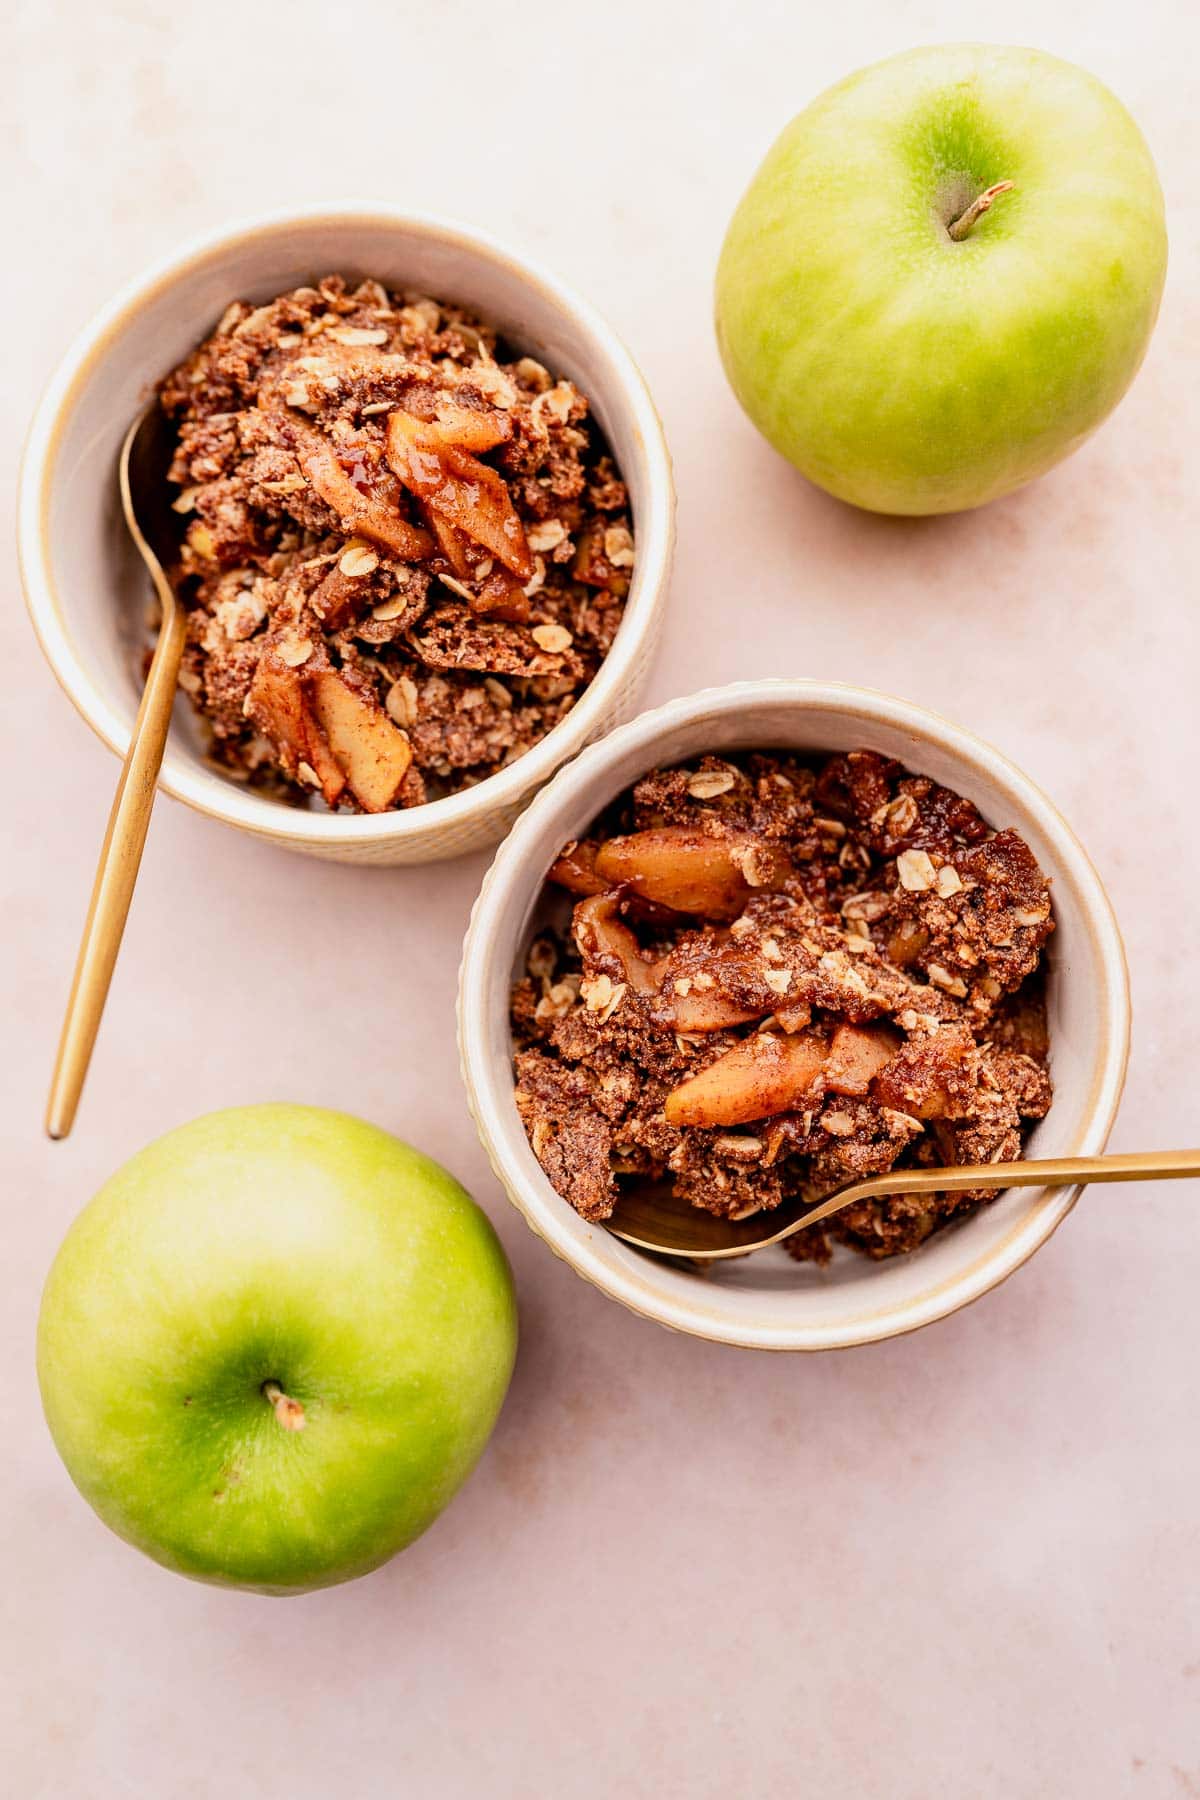 Two bowls of gluten-free apple crisp with apples and granola topping.